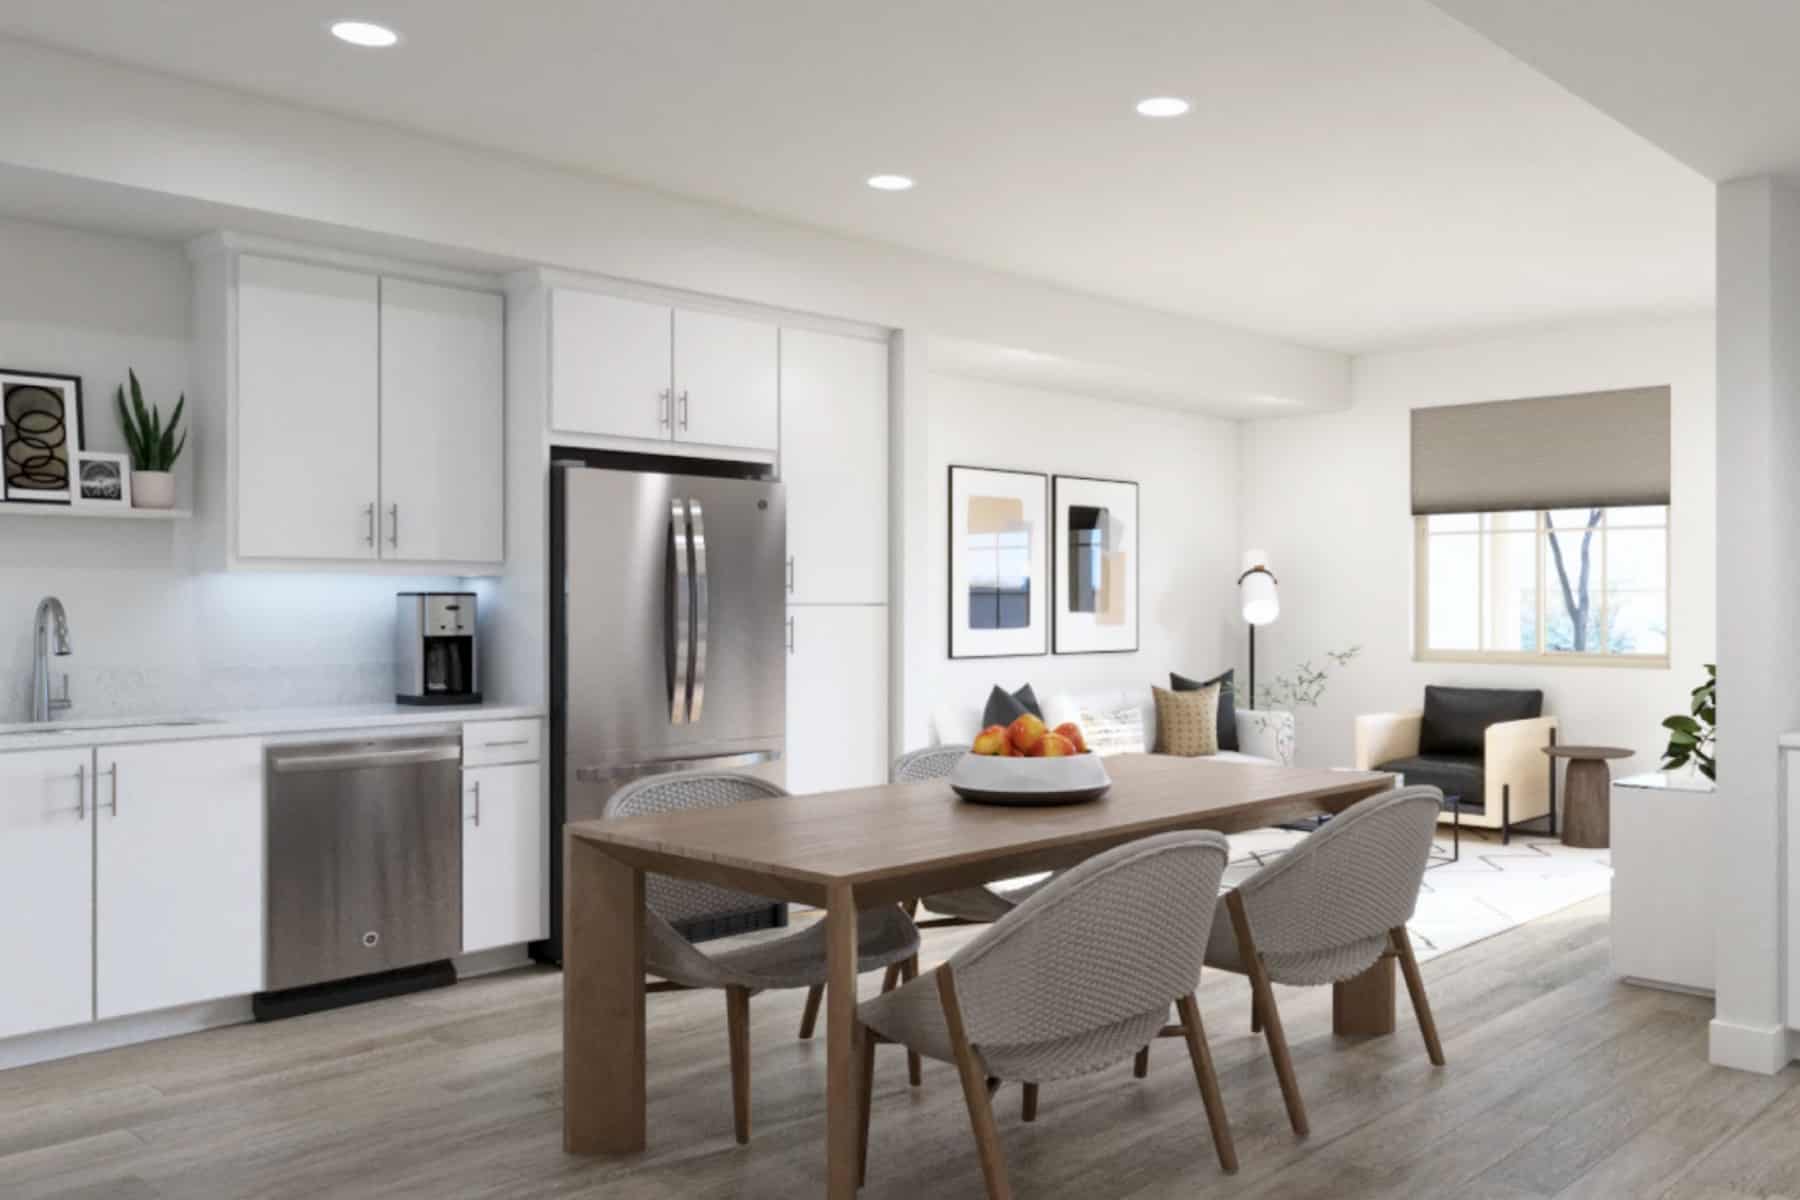 Cerise at Citrus Square Plan A2 Kitchen, Dining, and Living Room